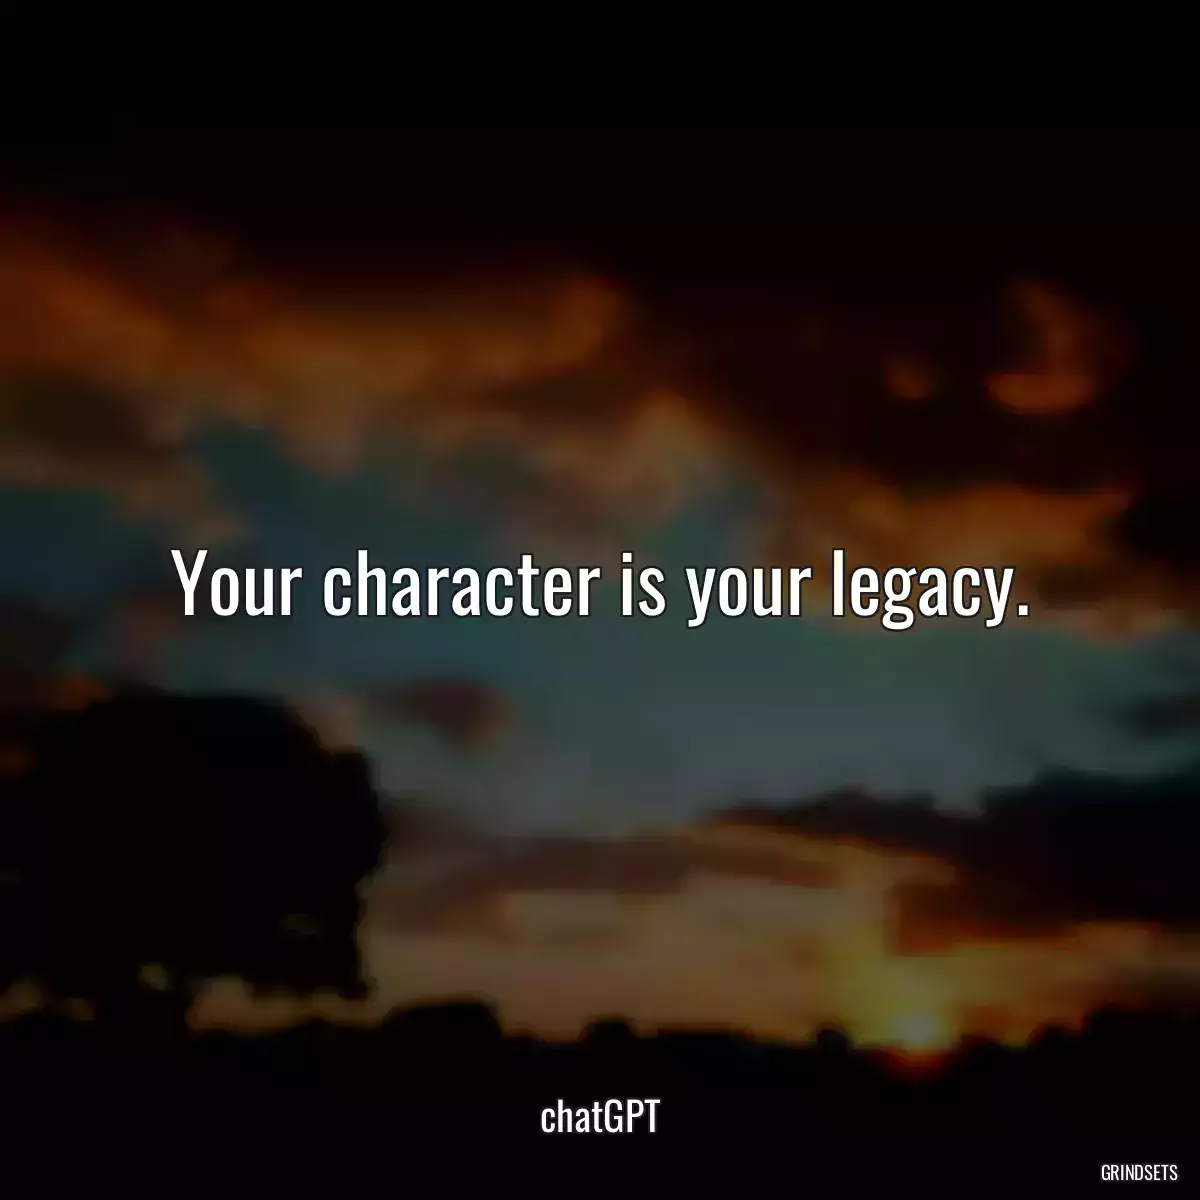 Your character is your legacy.